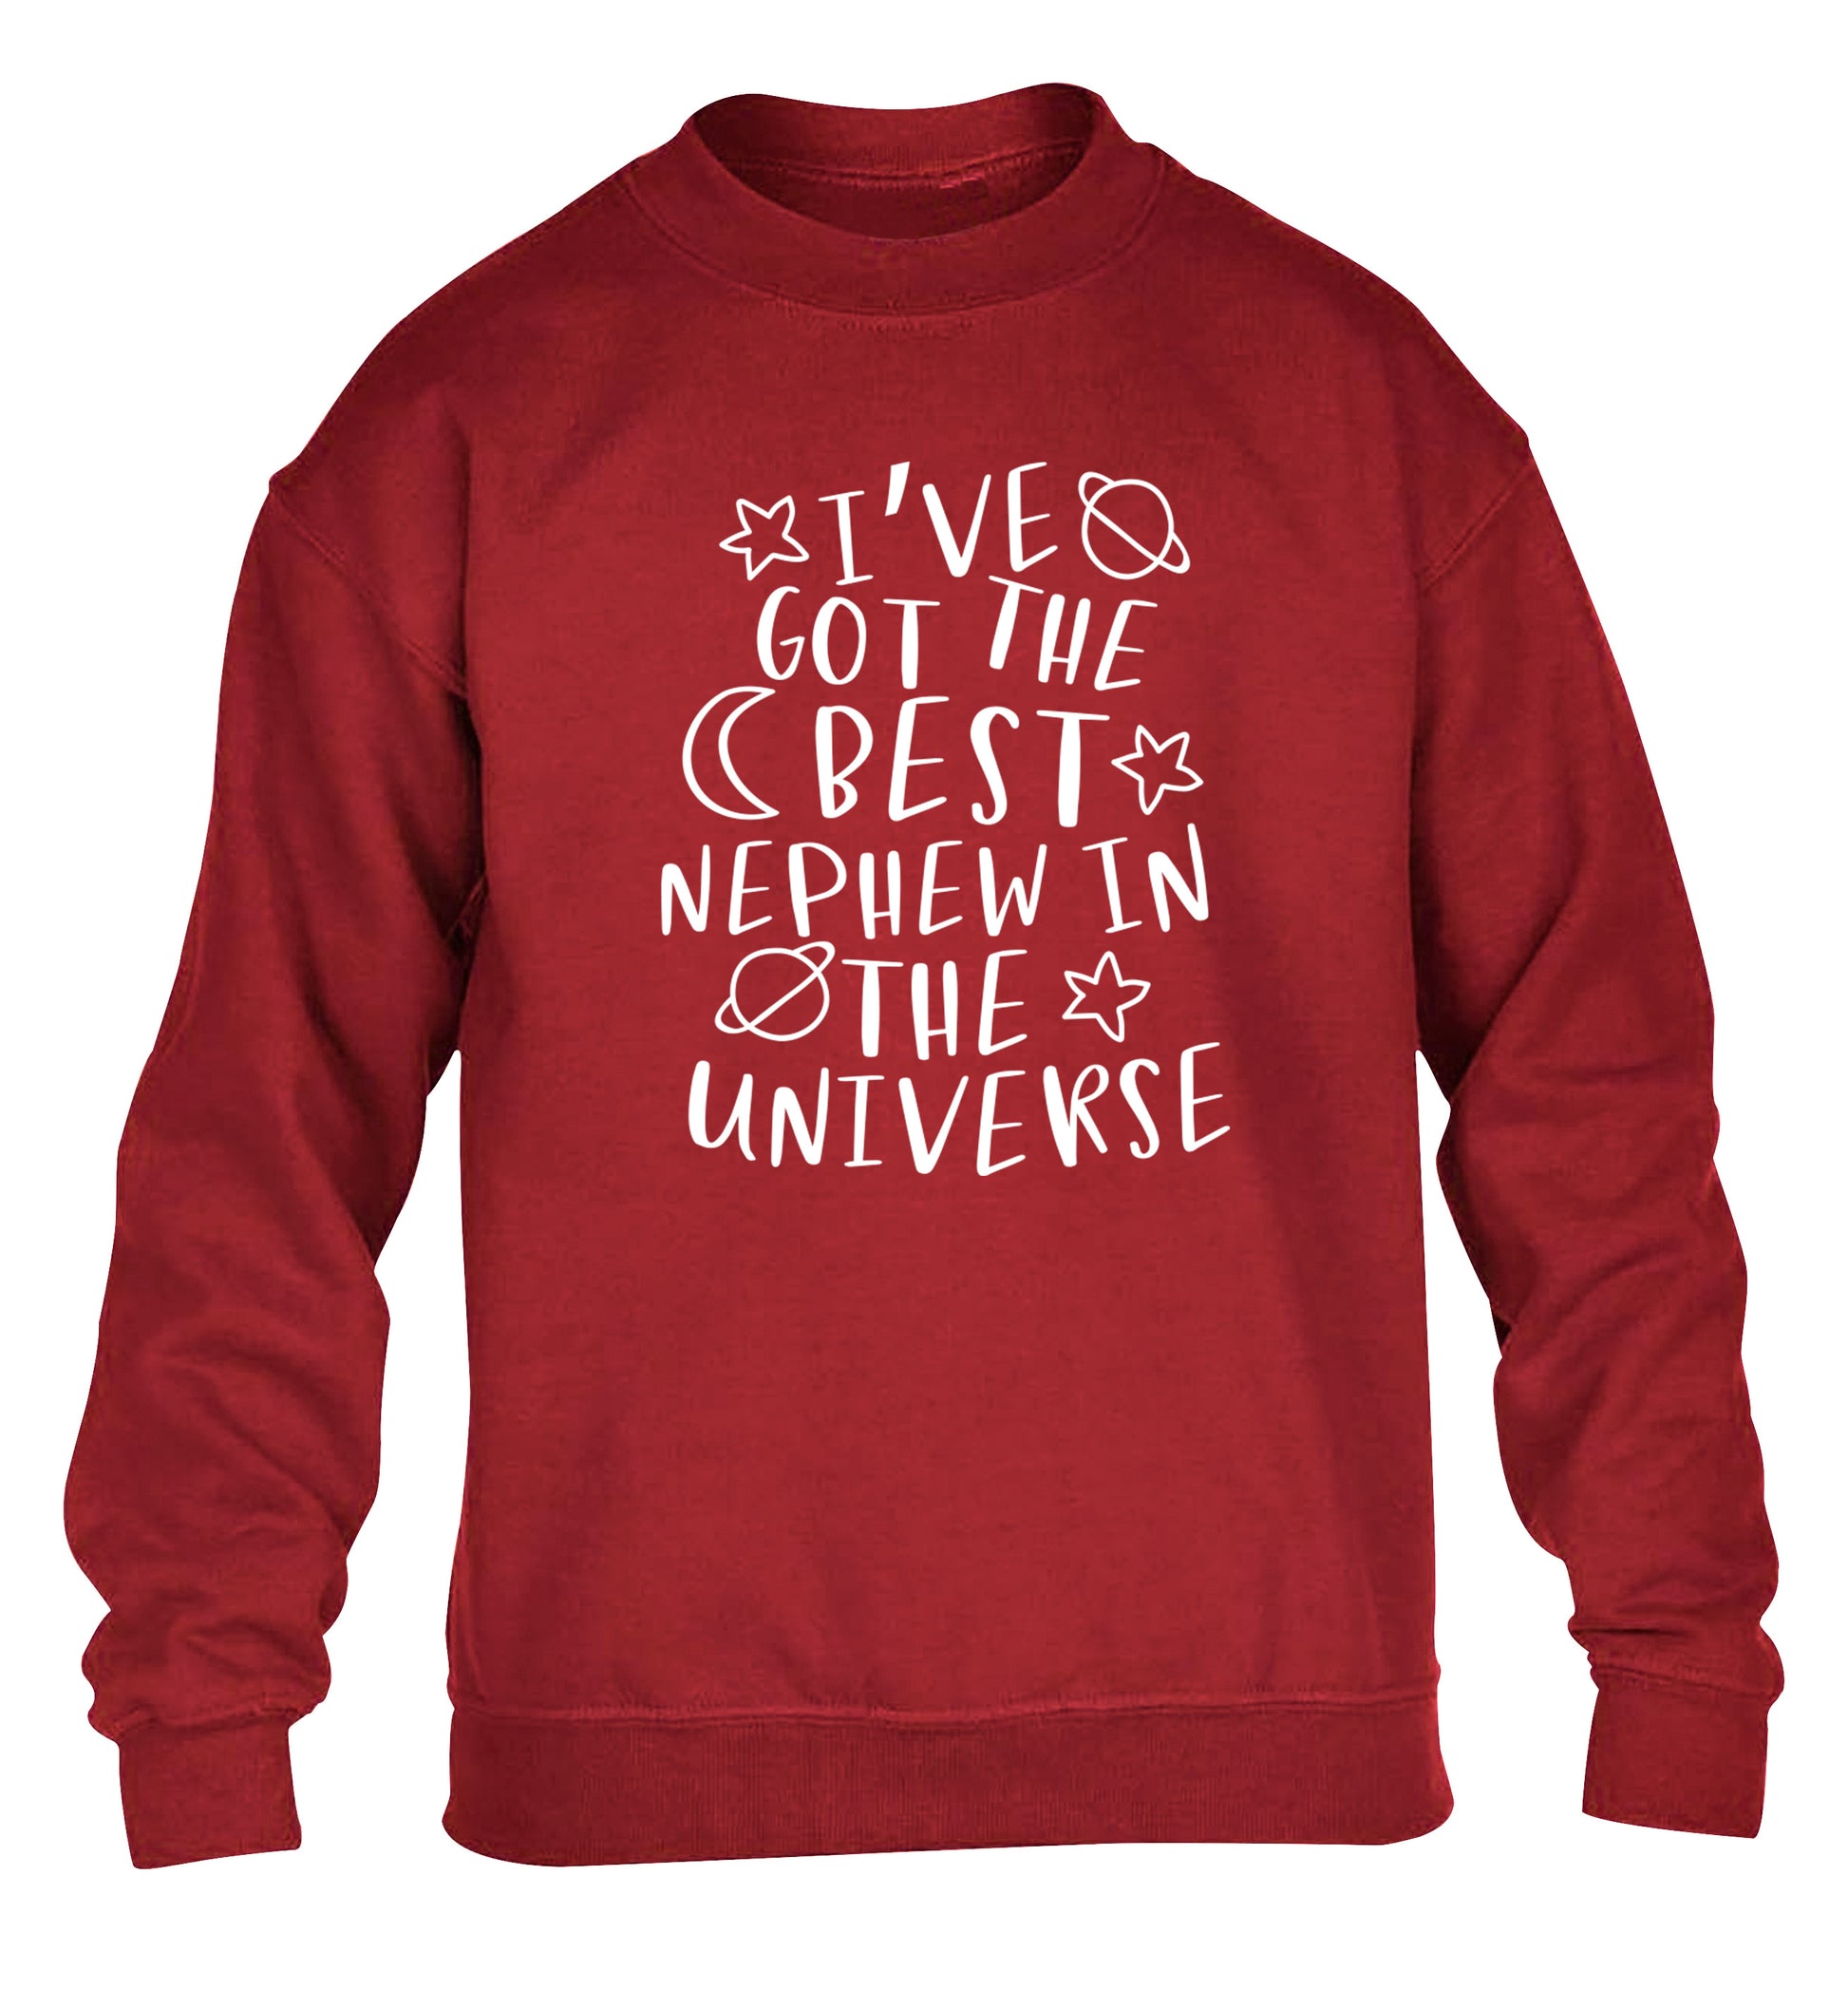 I've got the best nephew in the universe children's grey sweater 12-13 Years